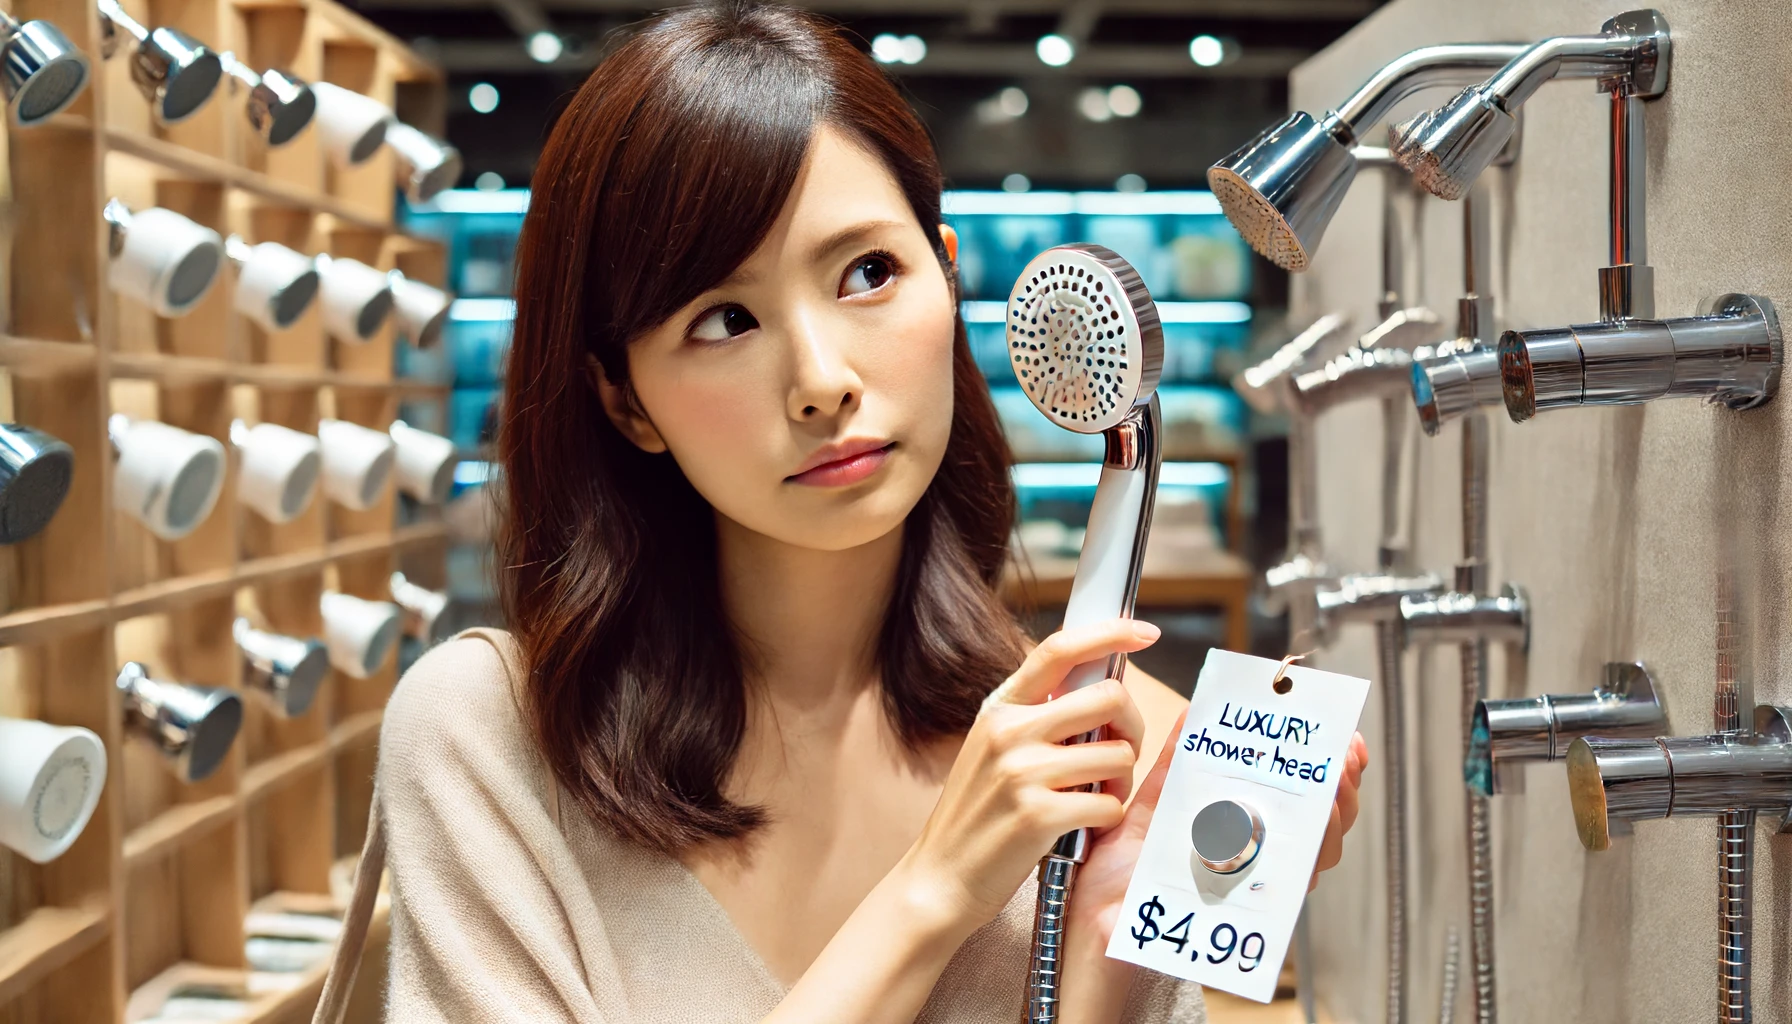 A Japanese woman holding a luxury handheld shower head with a price tag in a modern store setting. She looks thoughtful and is considering the price, with a display of various shower heads in the background.